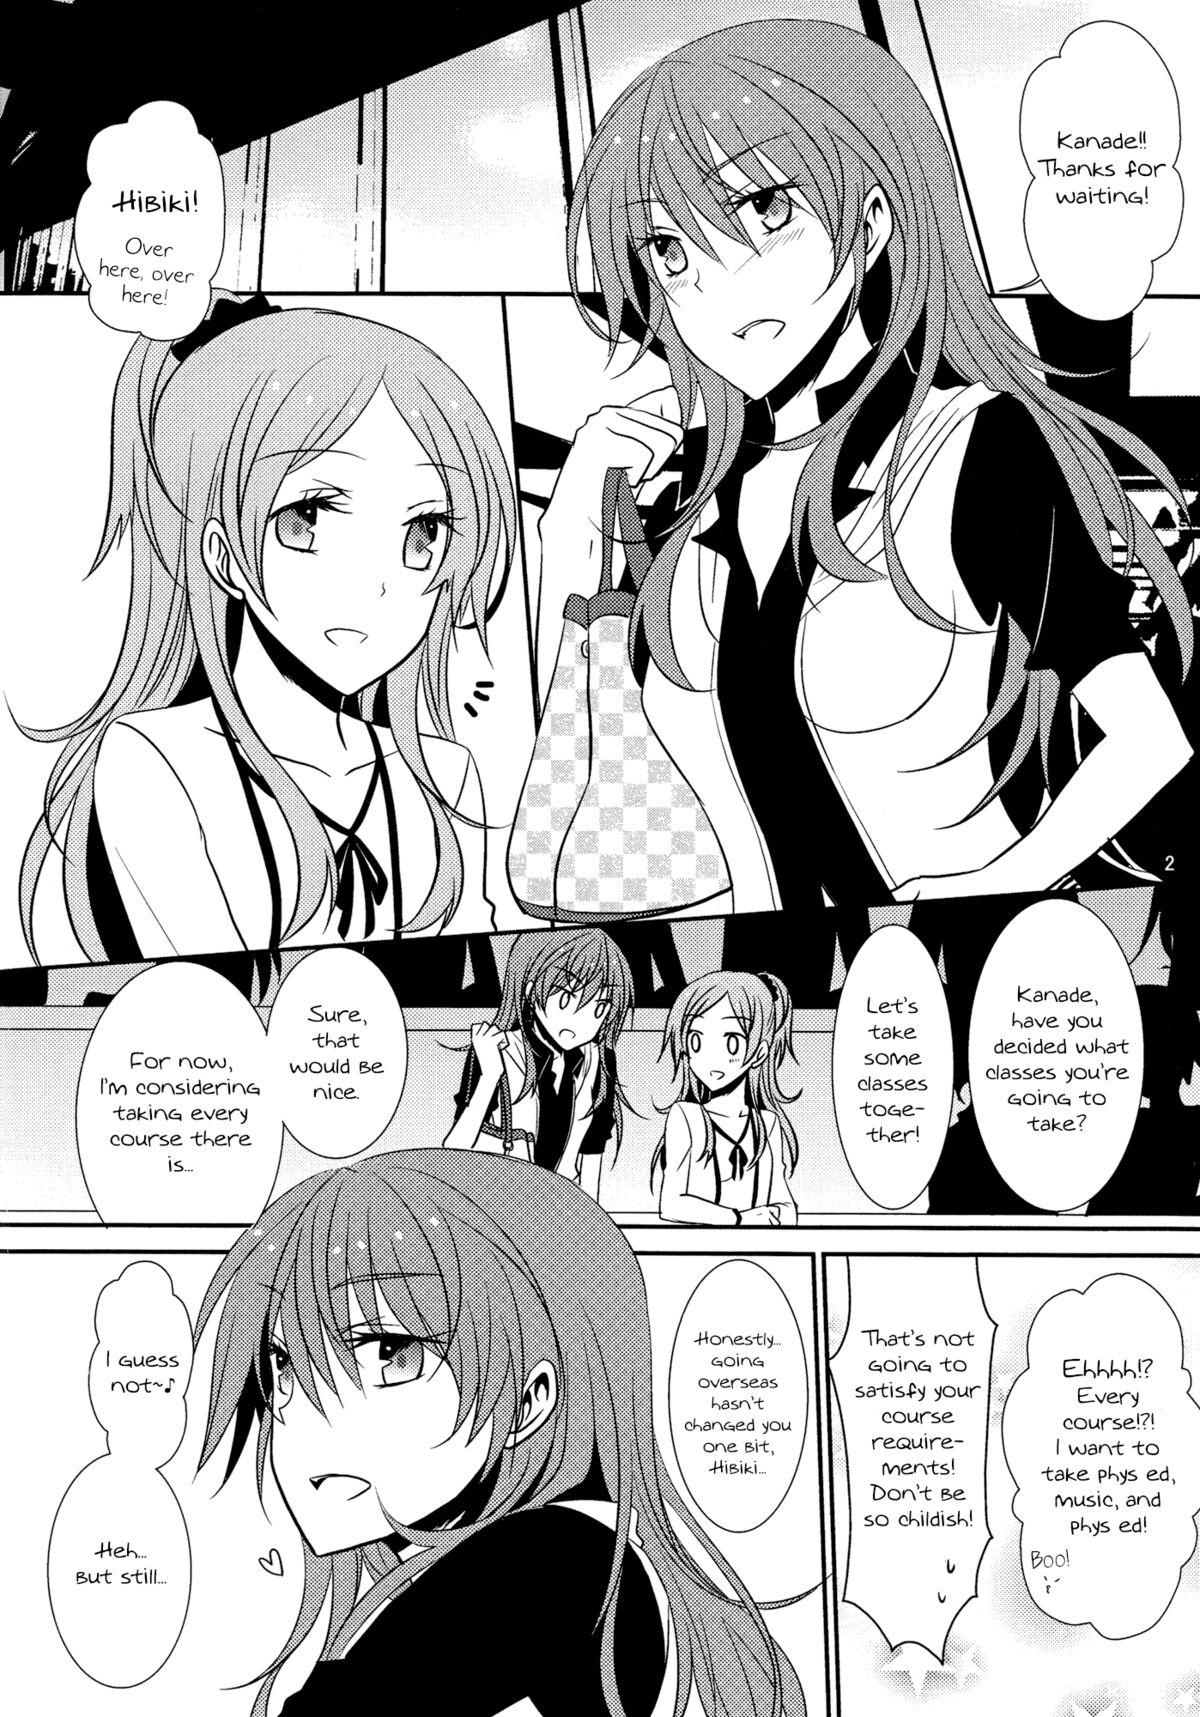 Hindi Addicted To You - Suite precure Girlnextdoor - Page 3